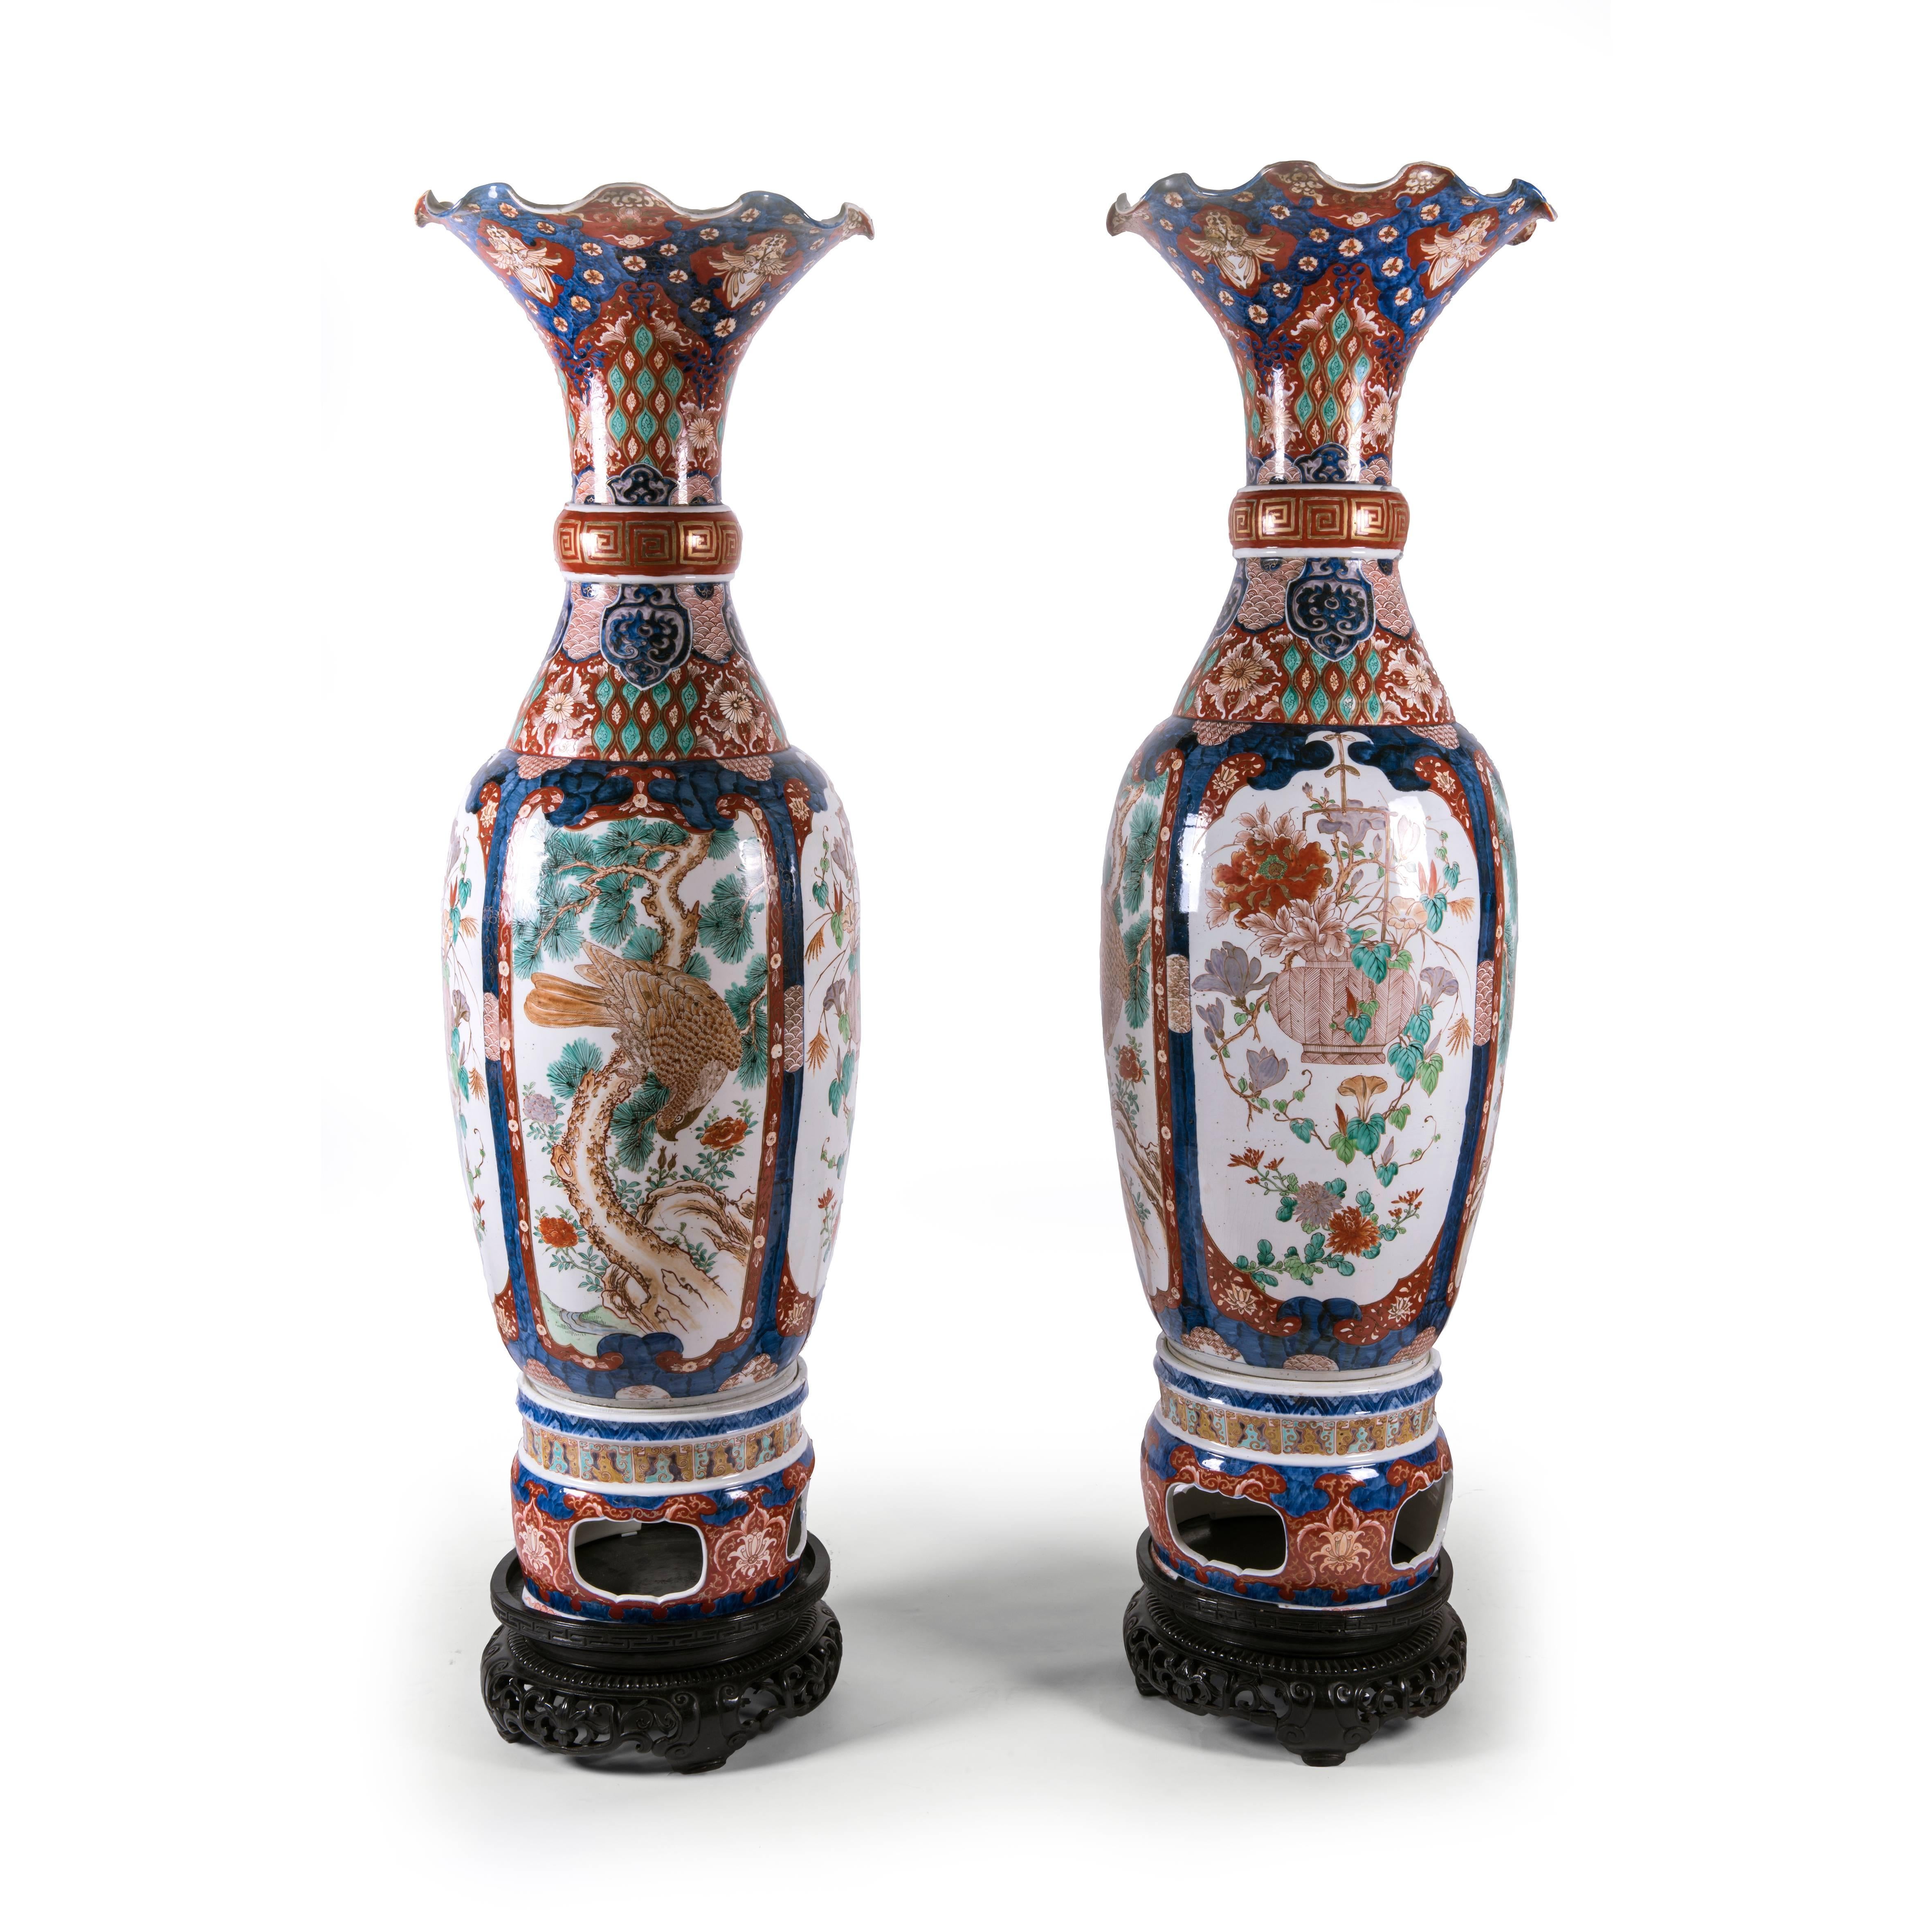 An impressive and rare pair of large Imari Arita Japanese porcelain vases, 165 centimeters, 64,96 inches high, dating back to last quarter of 19th century. They come from Como lake, from a luxury villa owned by a lady, seventy's years old. 
She told